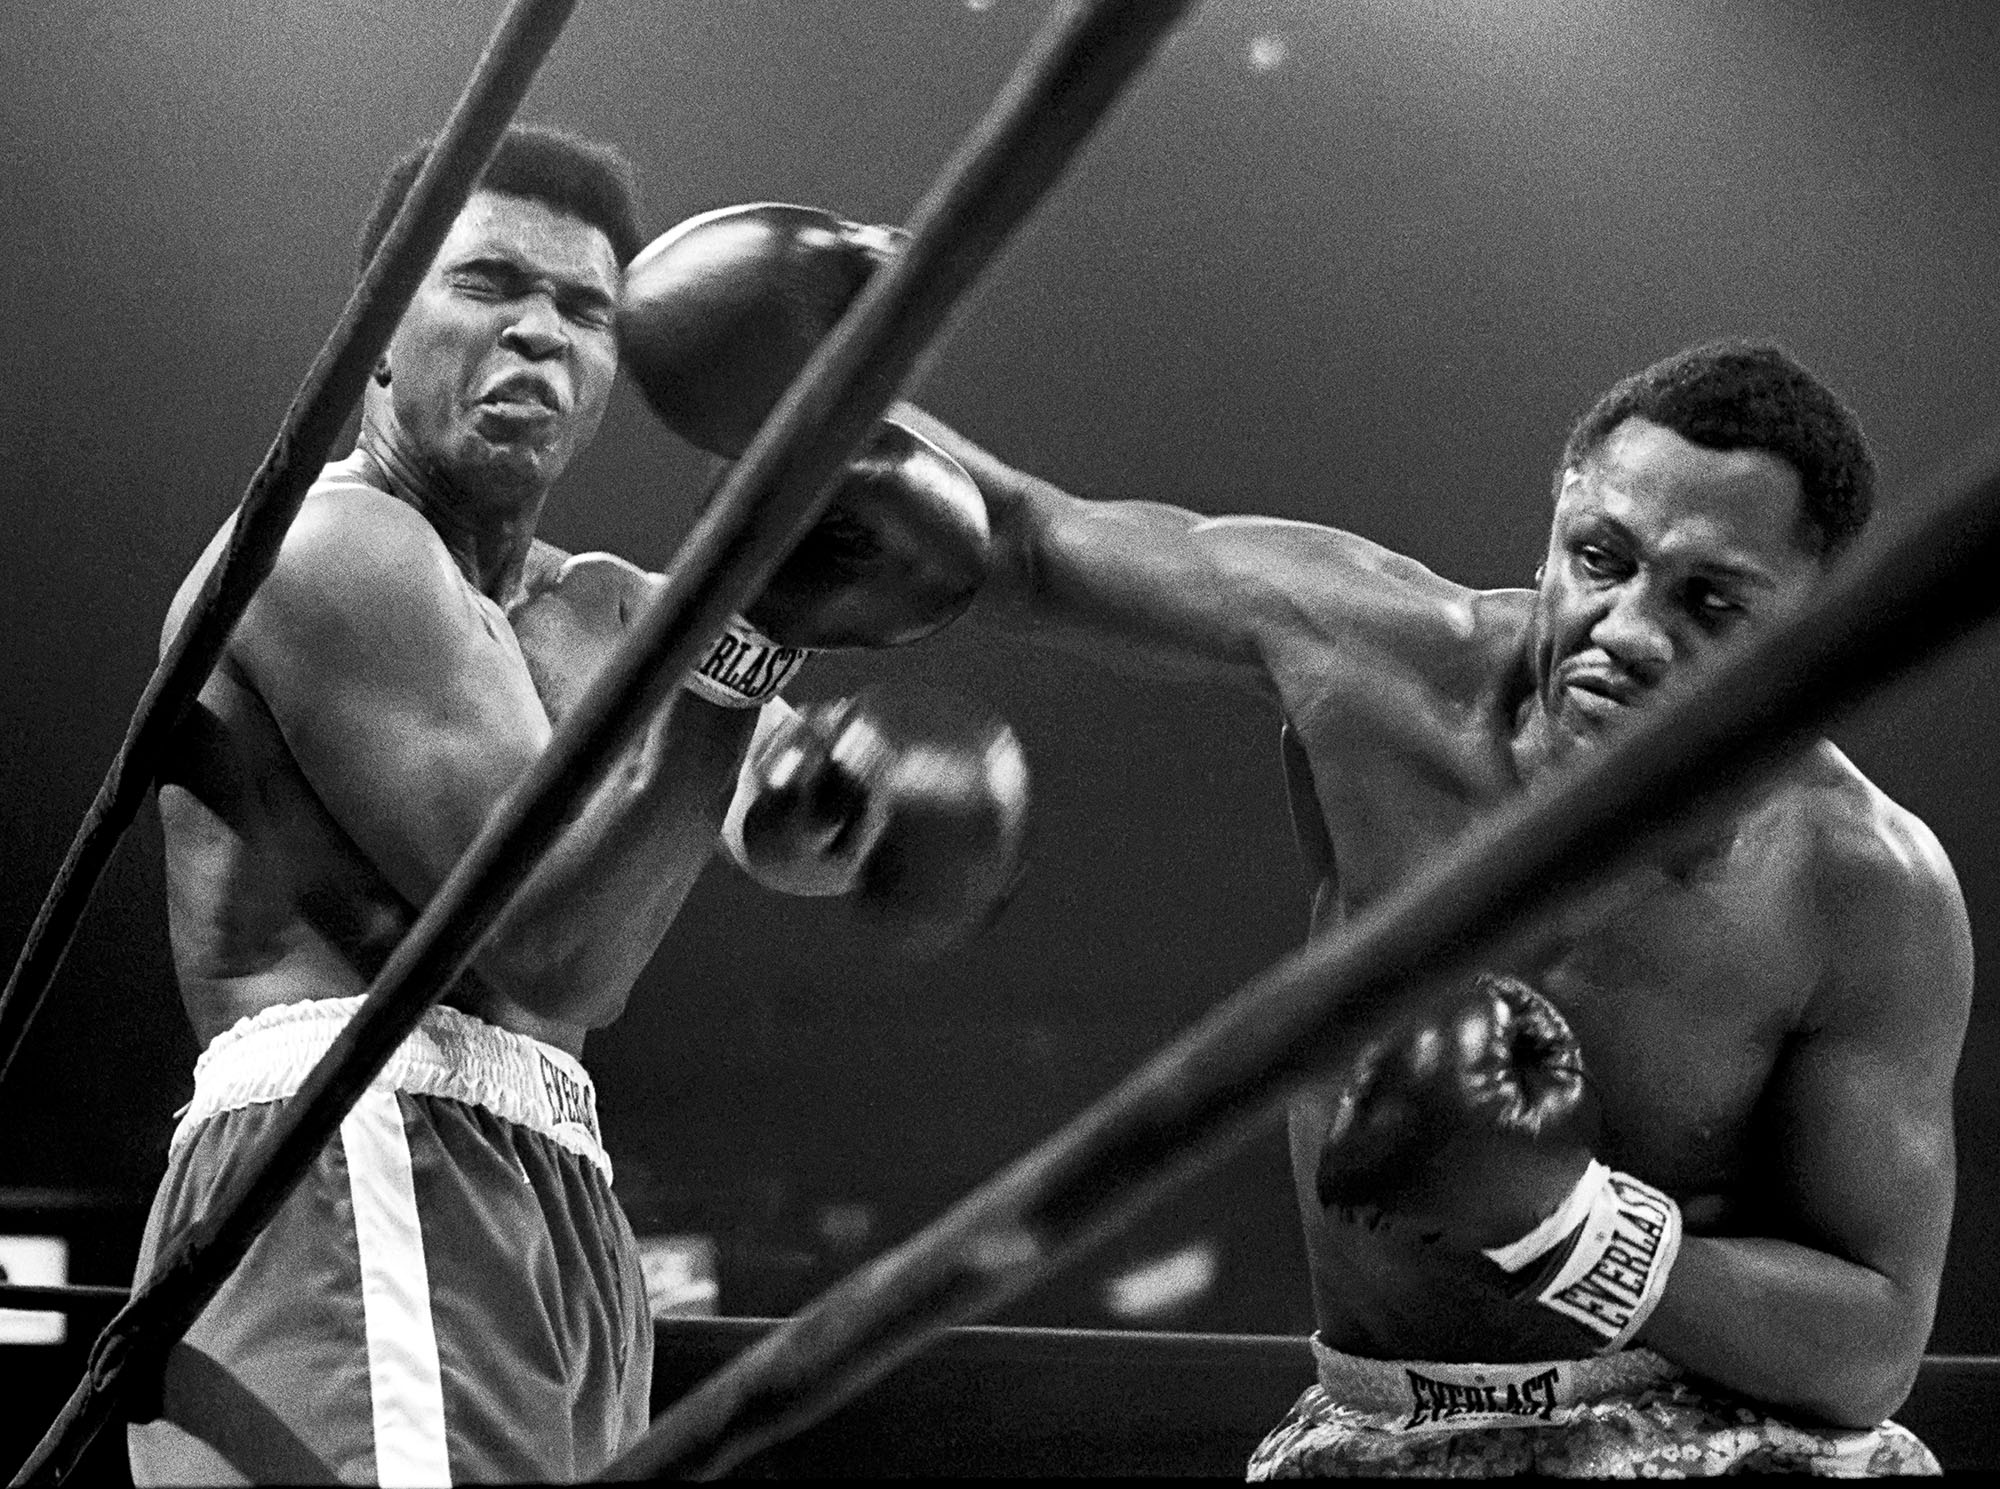 NEW YORK -- MARCH 8: Muhummad Ali takes a hit from Joe Frazier during their heavyweight match in Madison Square Garden, March 8, 1971, (photo by David Hume Kennerly)